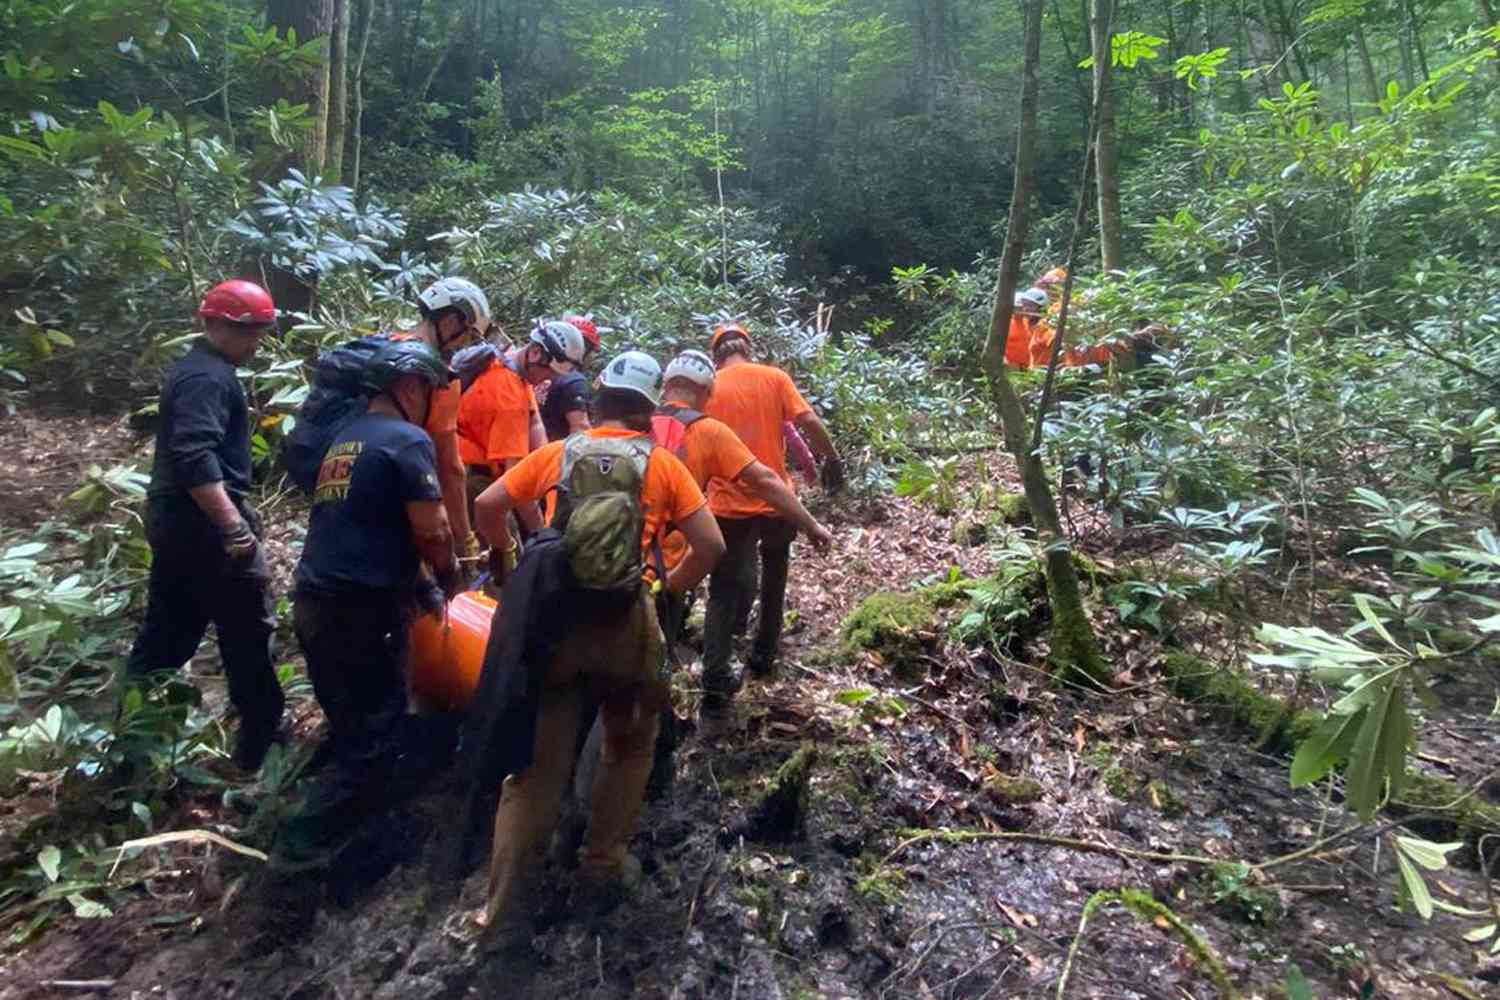 Missing Hiker, 48, Found Alive After 2 Weeks in Kentucky’s Red River Gorge: 'It Is Truly a Miracle’